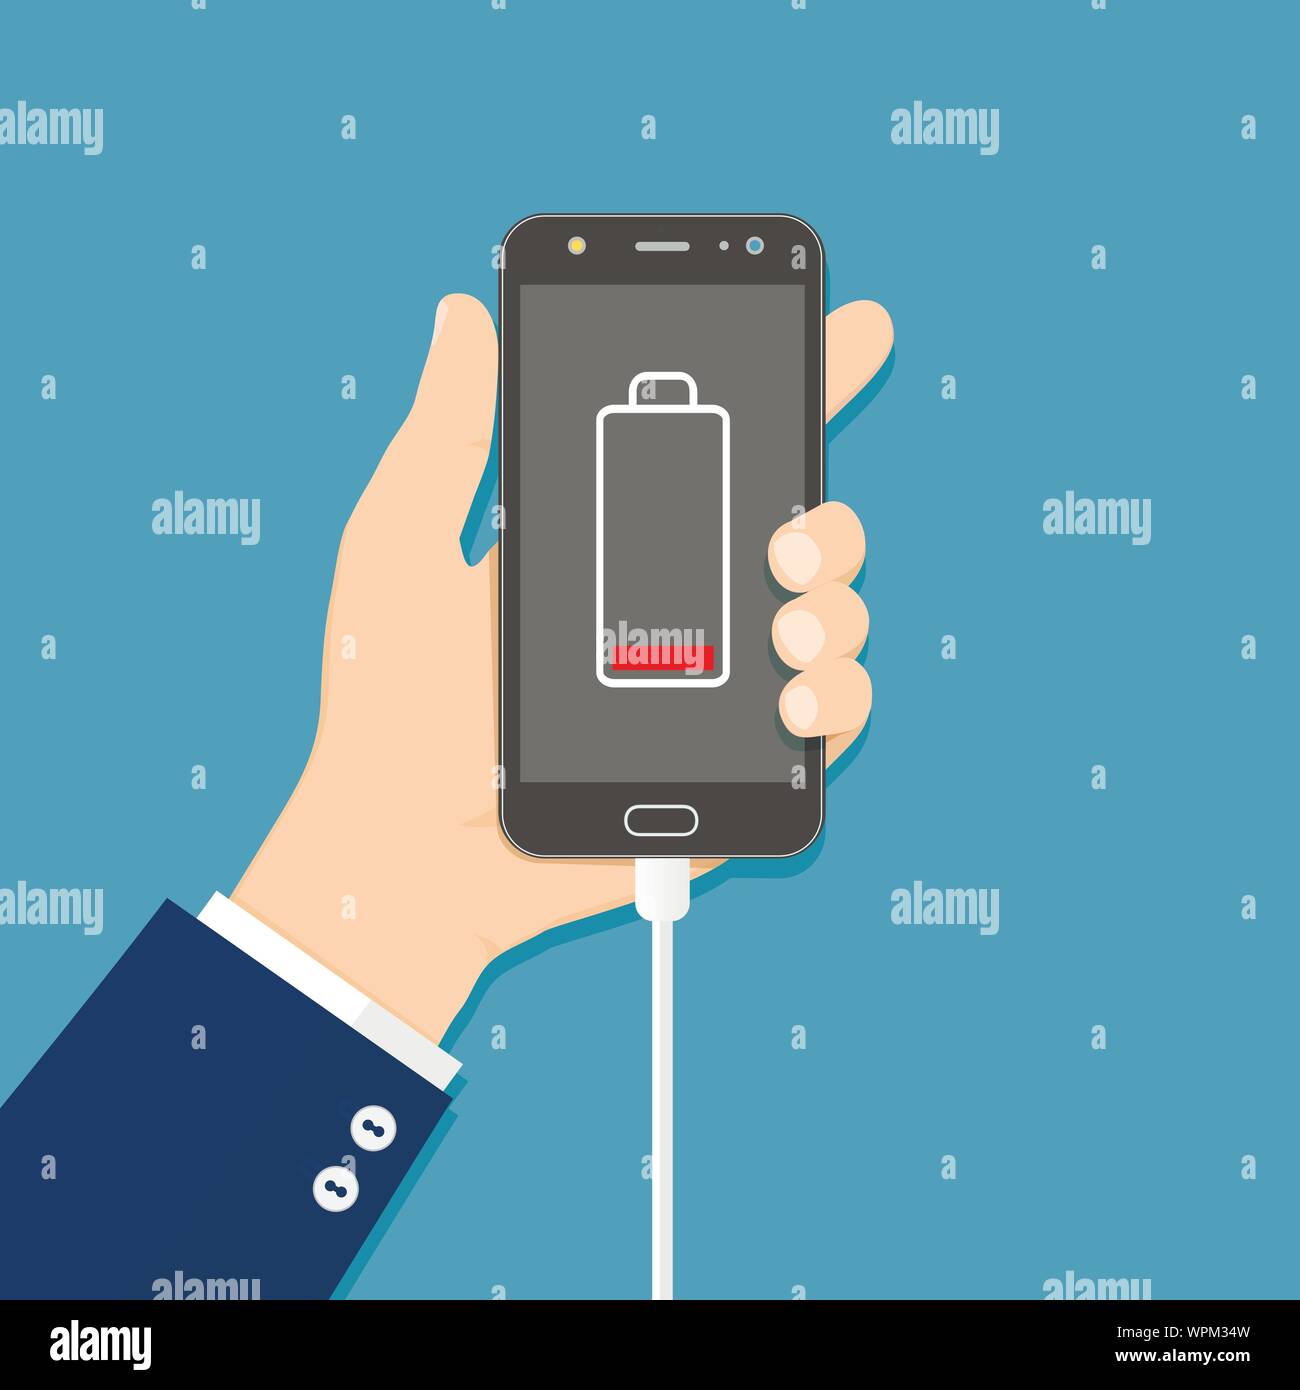 Hand holding smartphone with charger connected and low battery icon on screen. Flat vector illustration Stock Vector